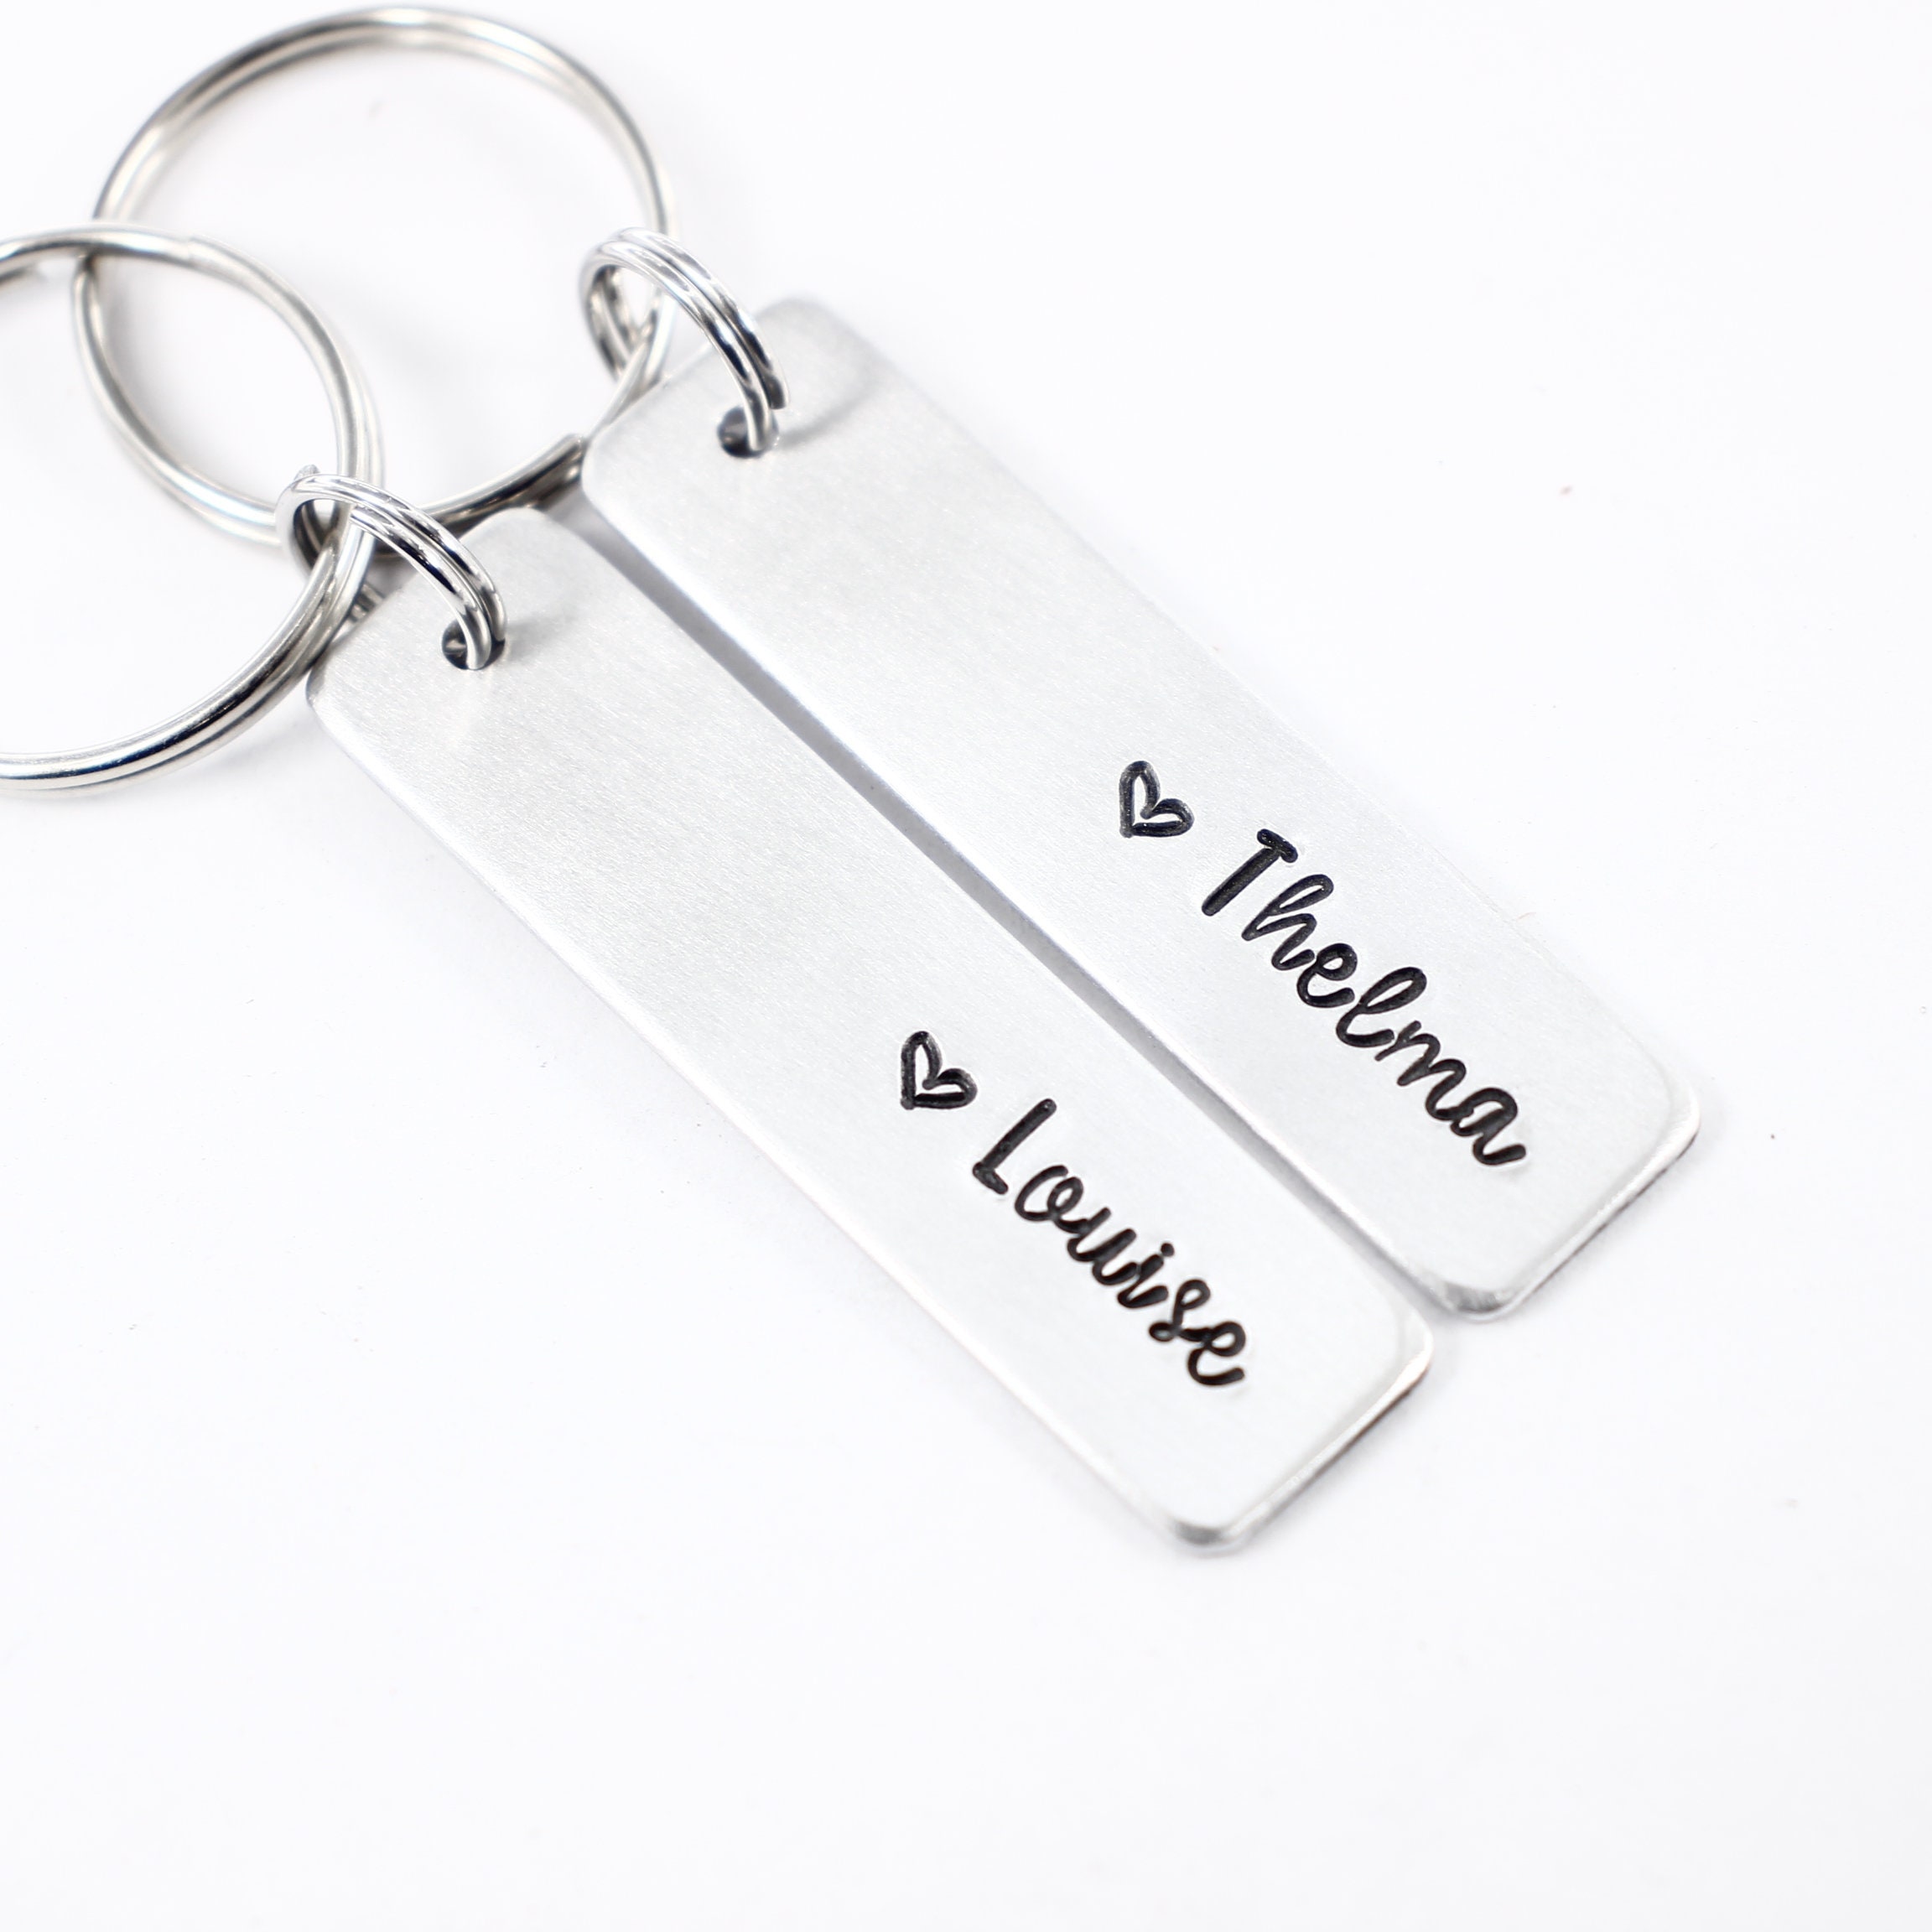 Thelma and Louise Hotel Keychain